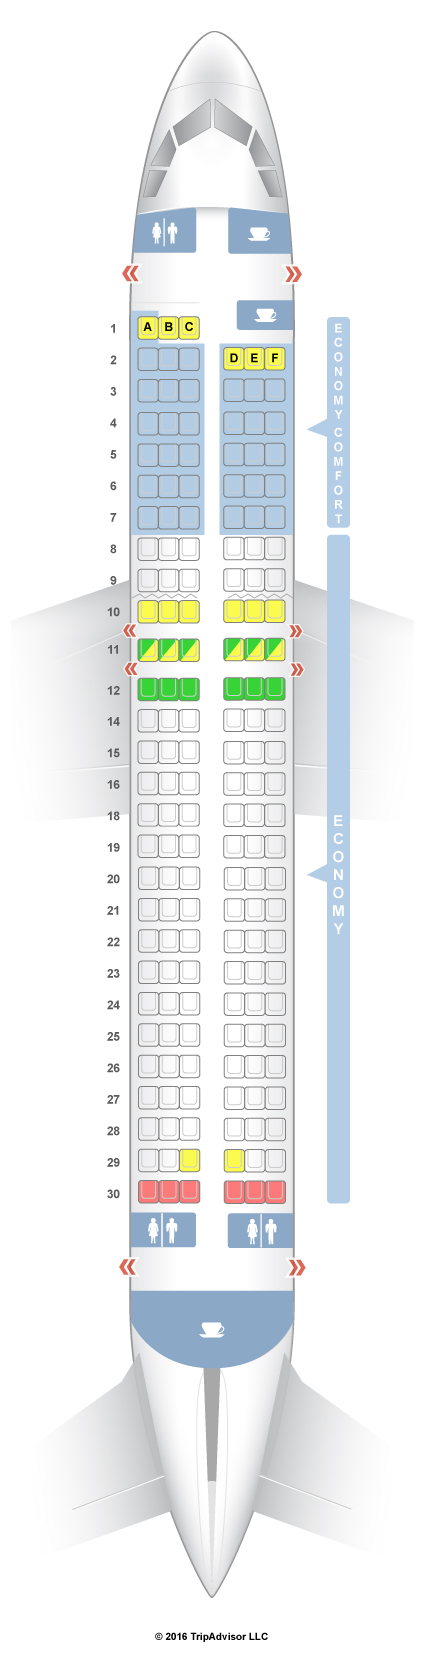 United Airlines Airbus A320 Seating Chart